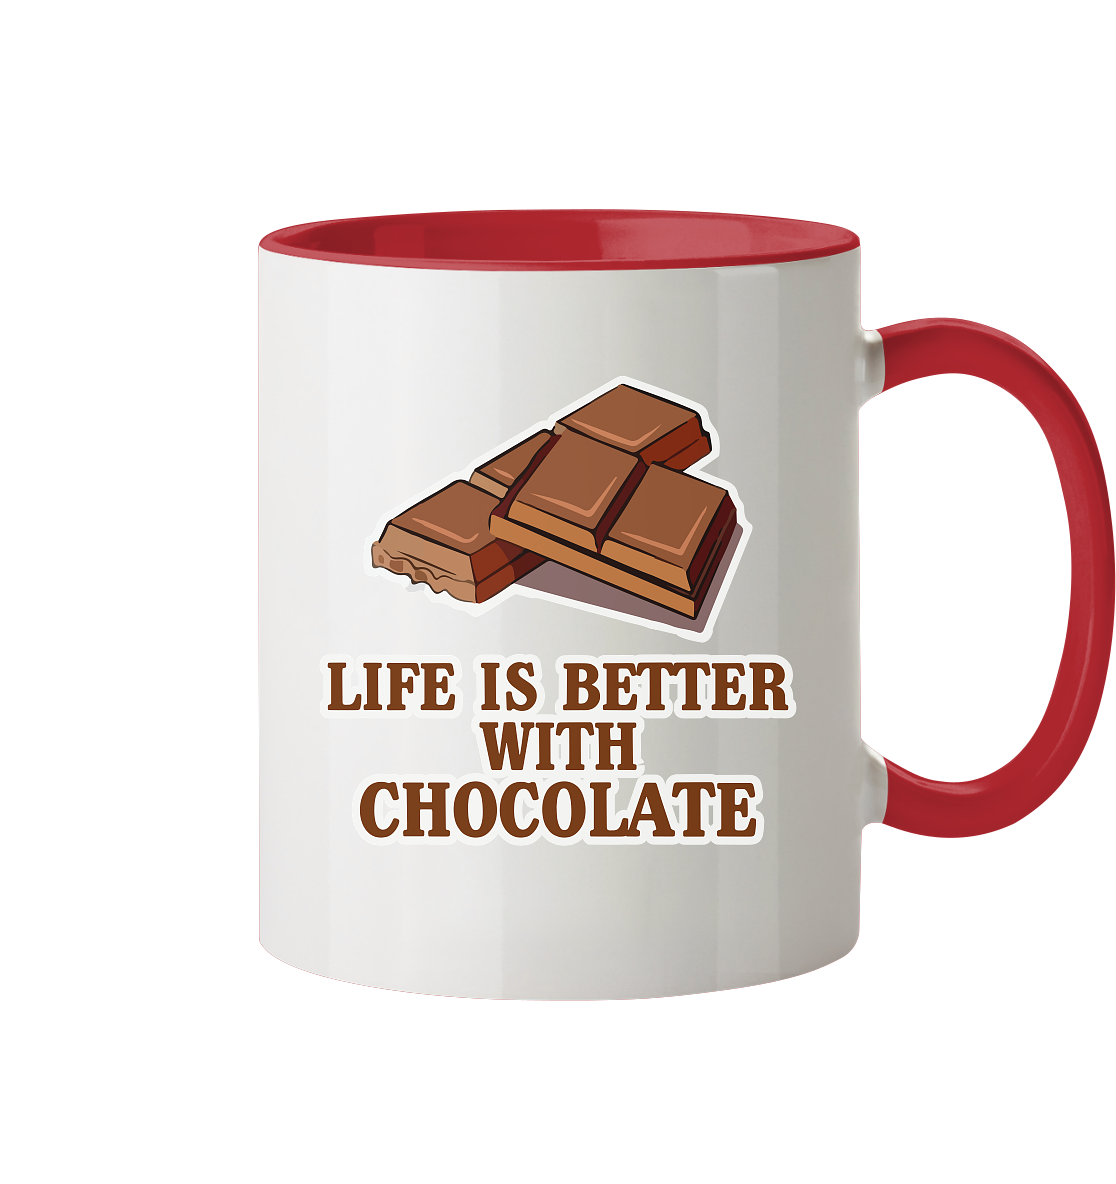 Life is better with chocolate - Tasse zweifarbig